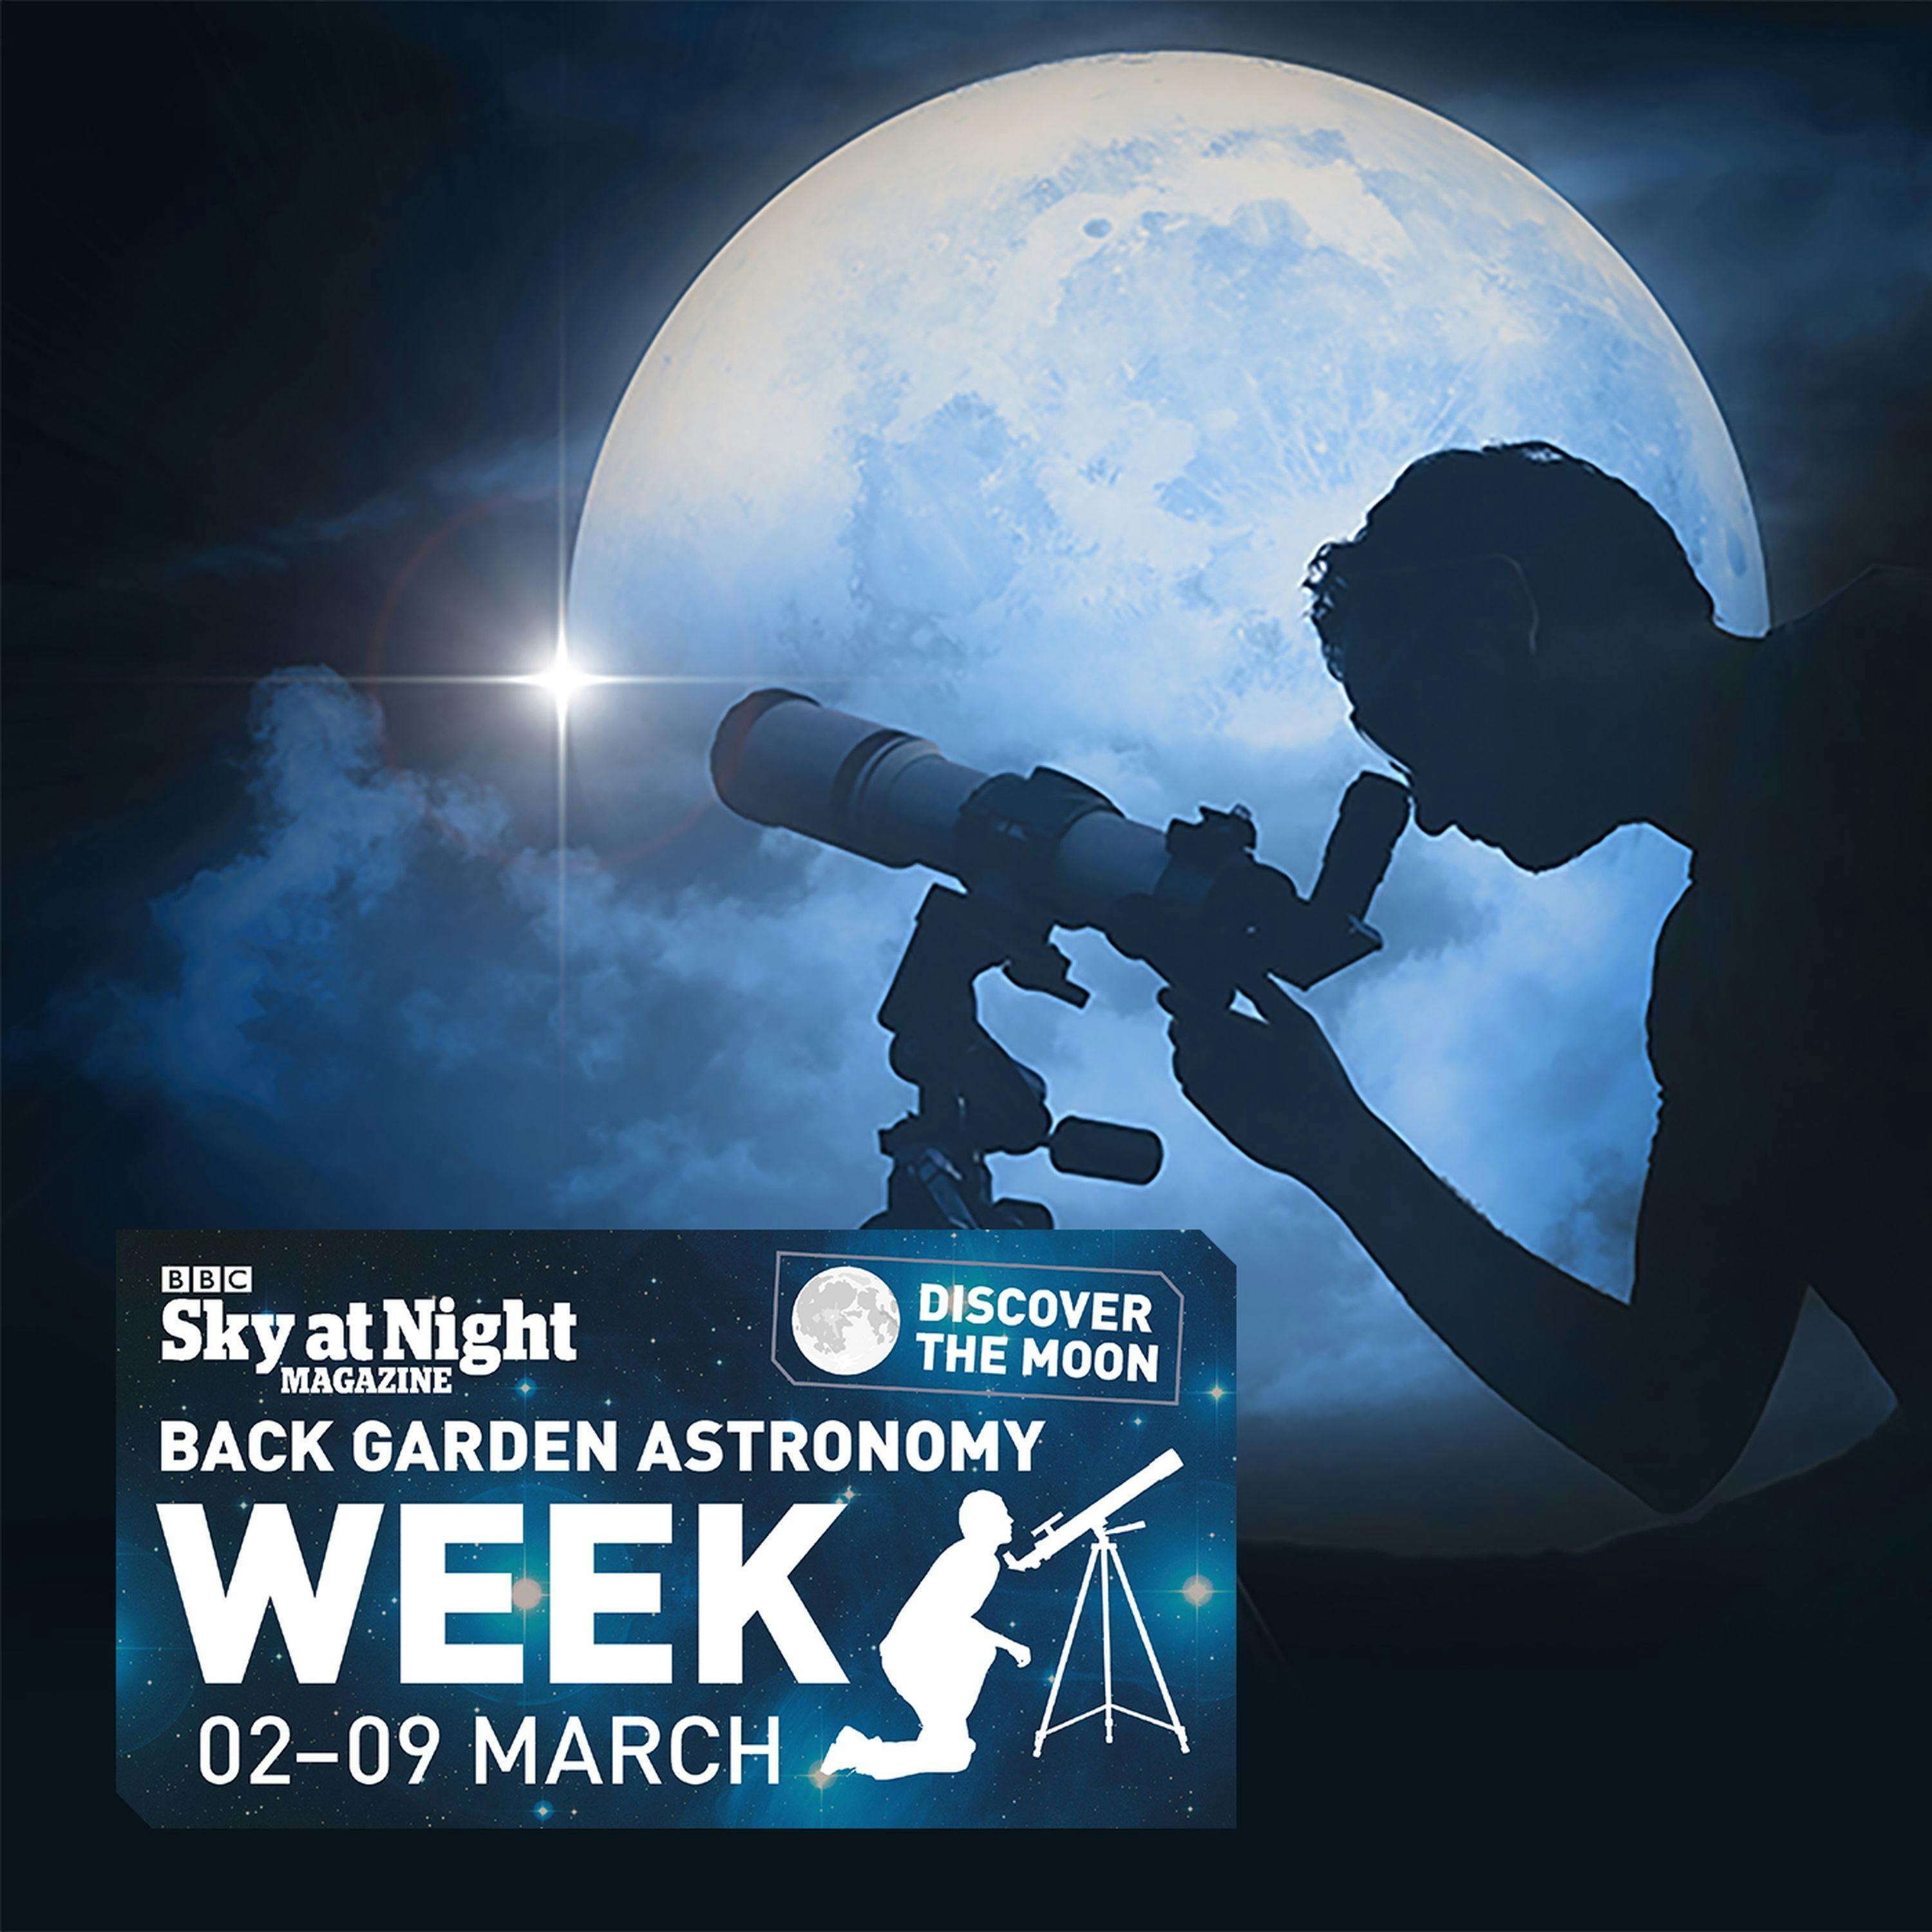 Day Two – Back Garden Astronomy Week: The Moon